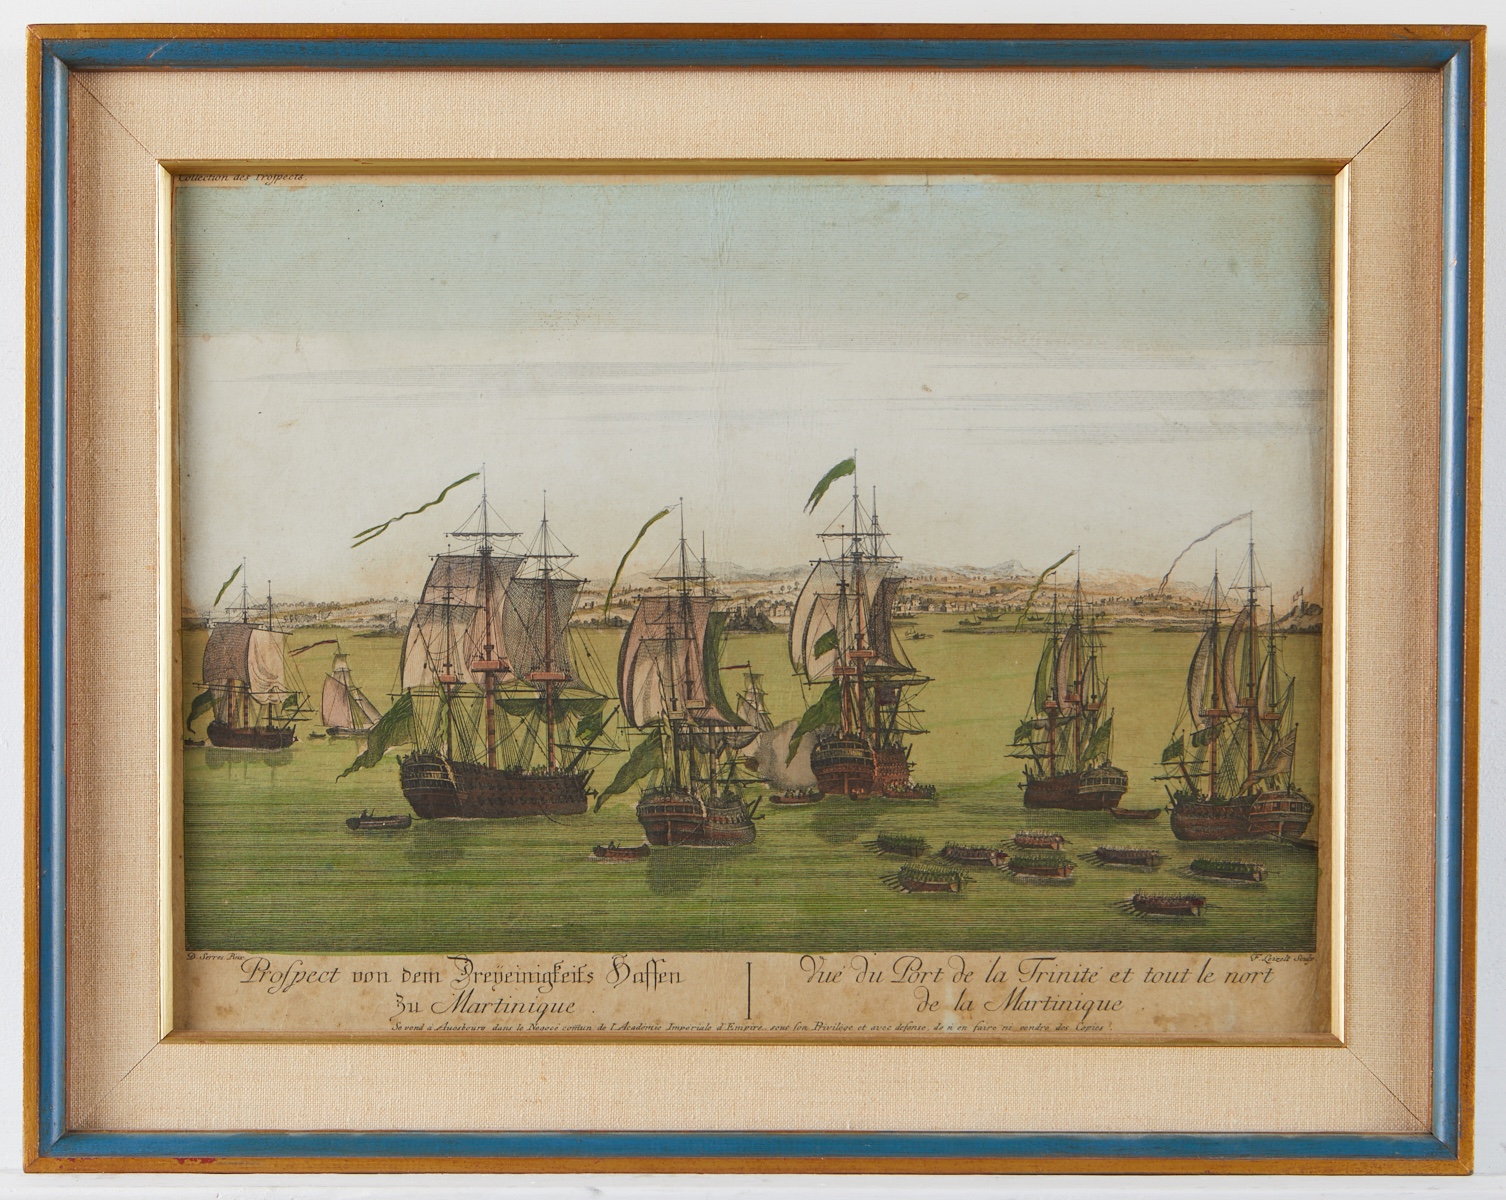 6 Framed 18th Century Prints - Image 19 of 35